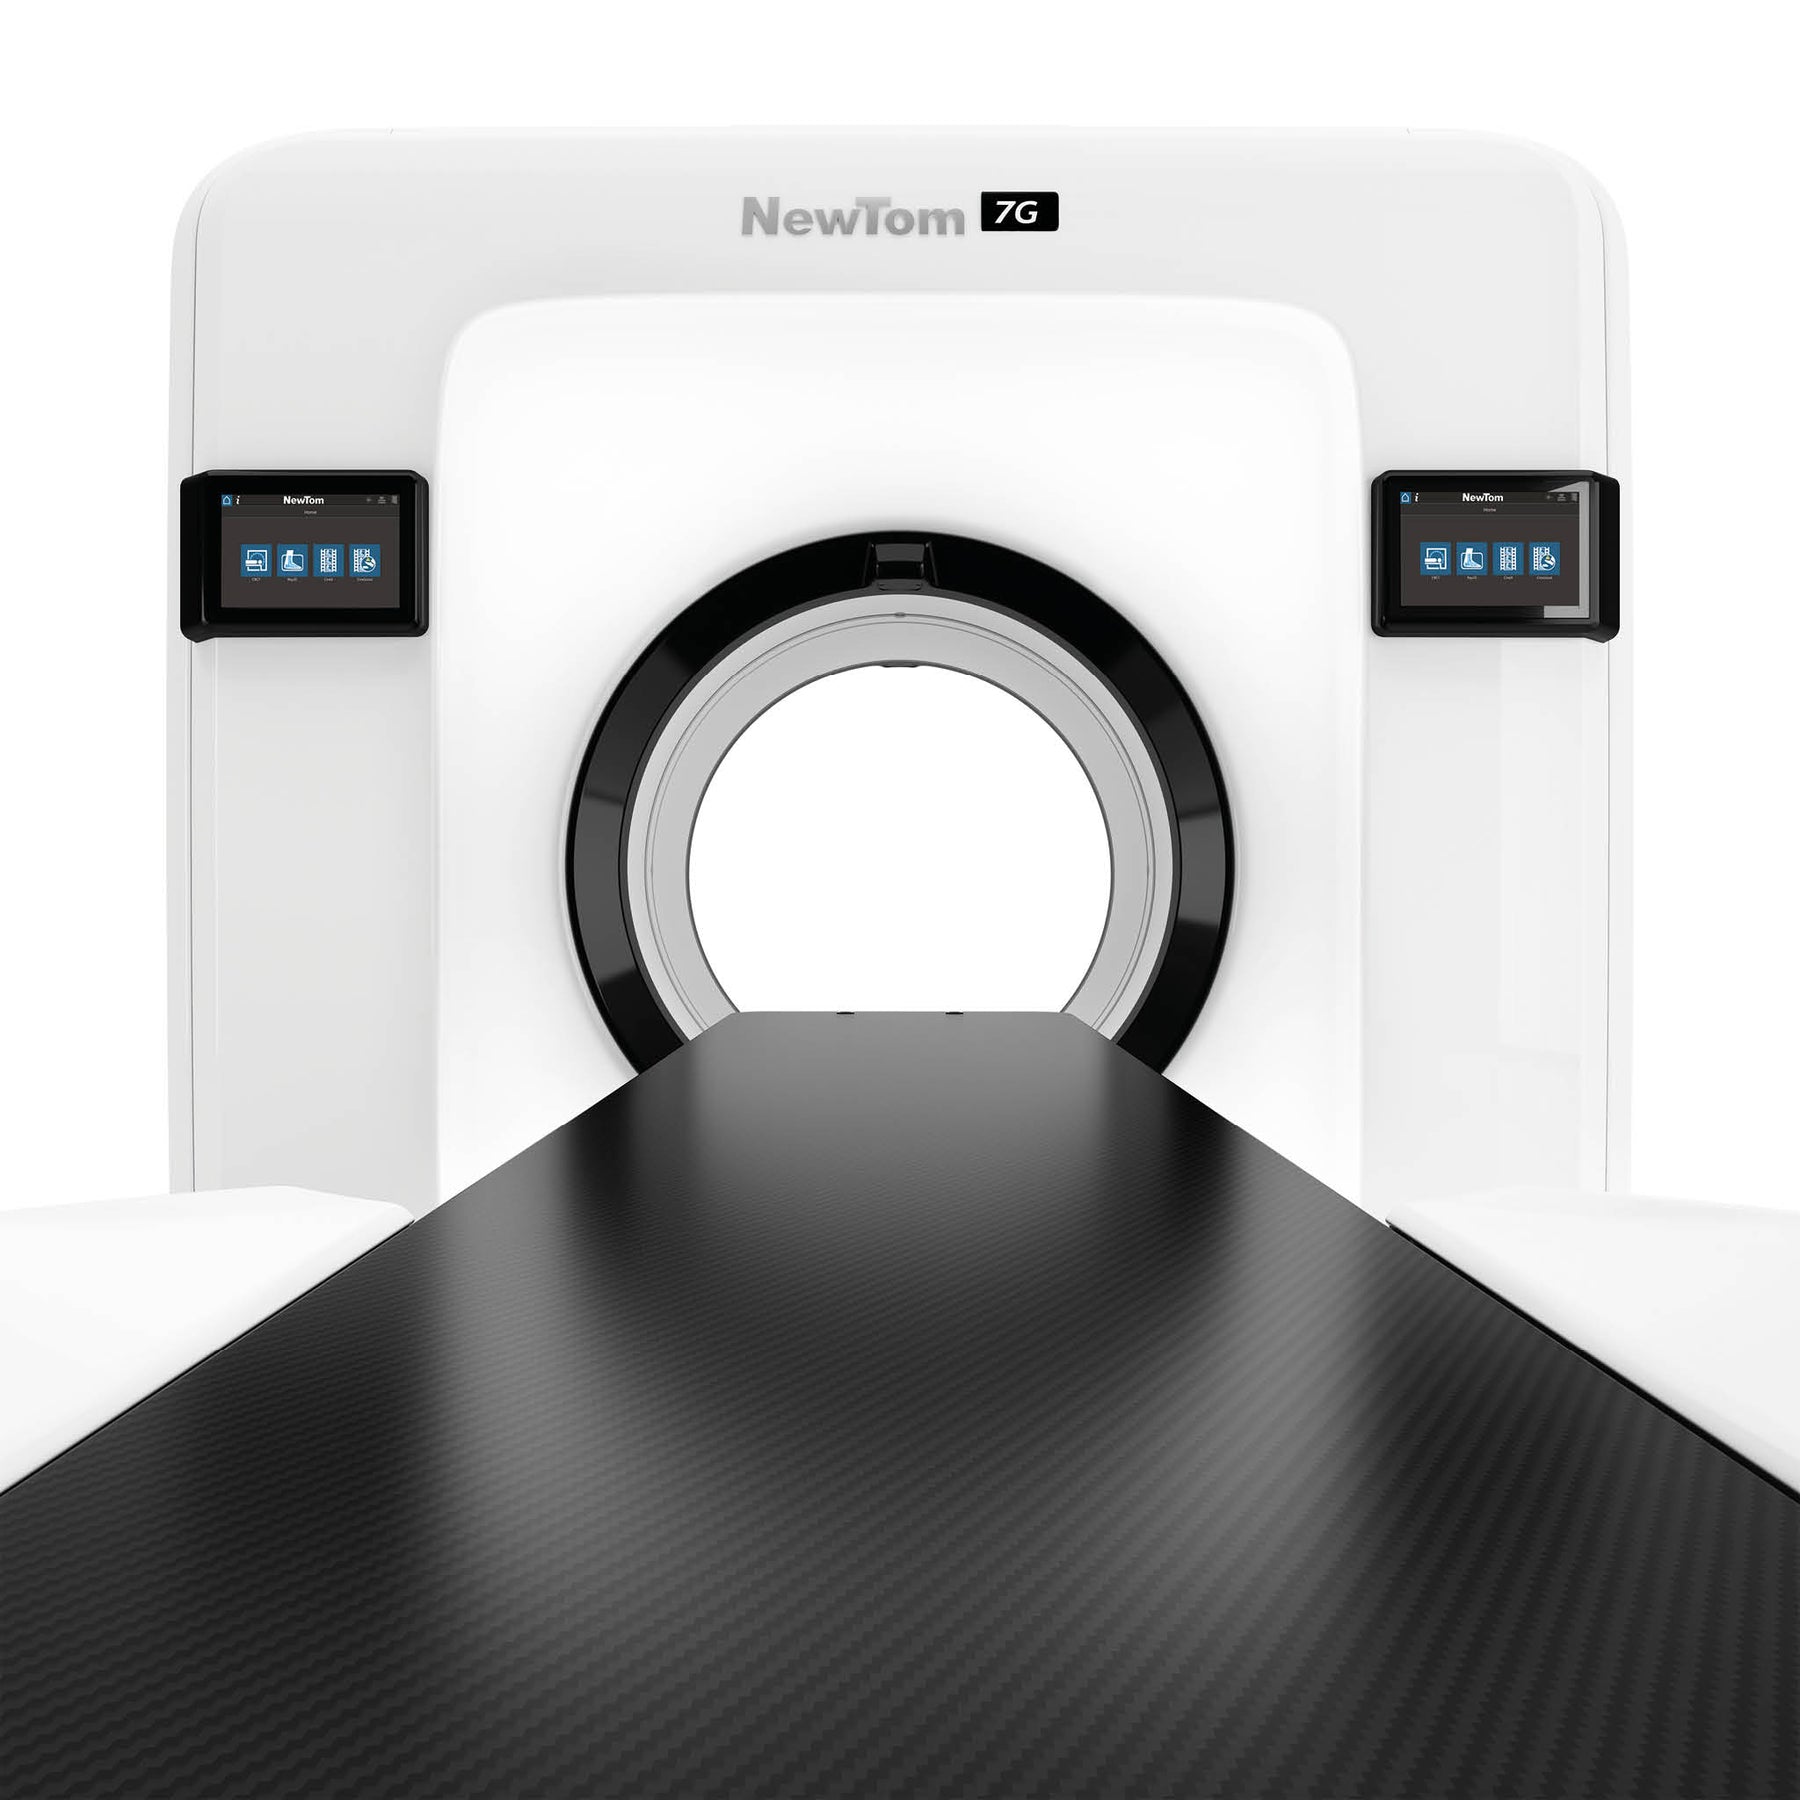 NewTom 7G is the most advanced CBCT device on the market. Large gantry opening.